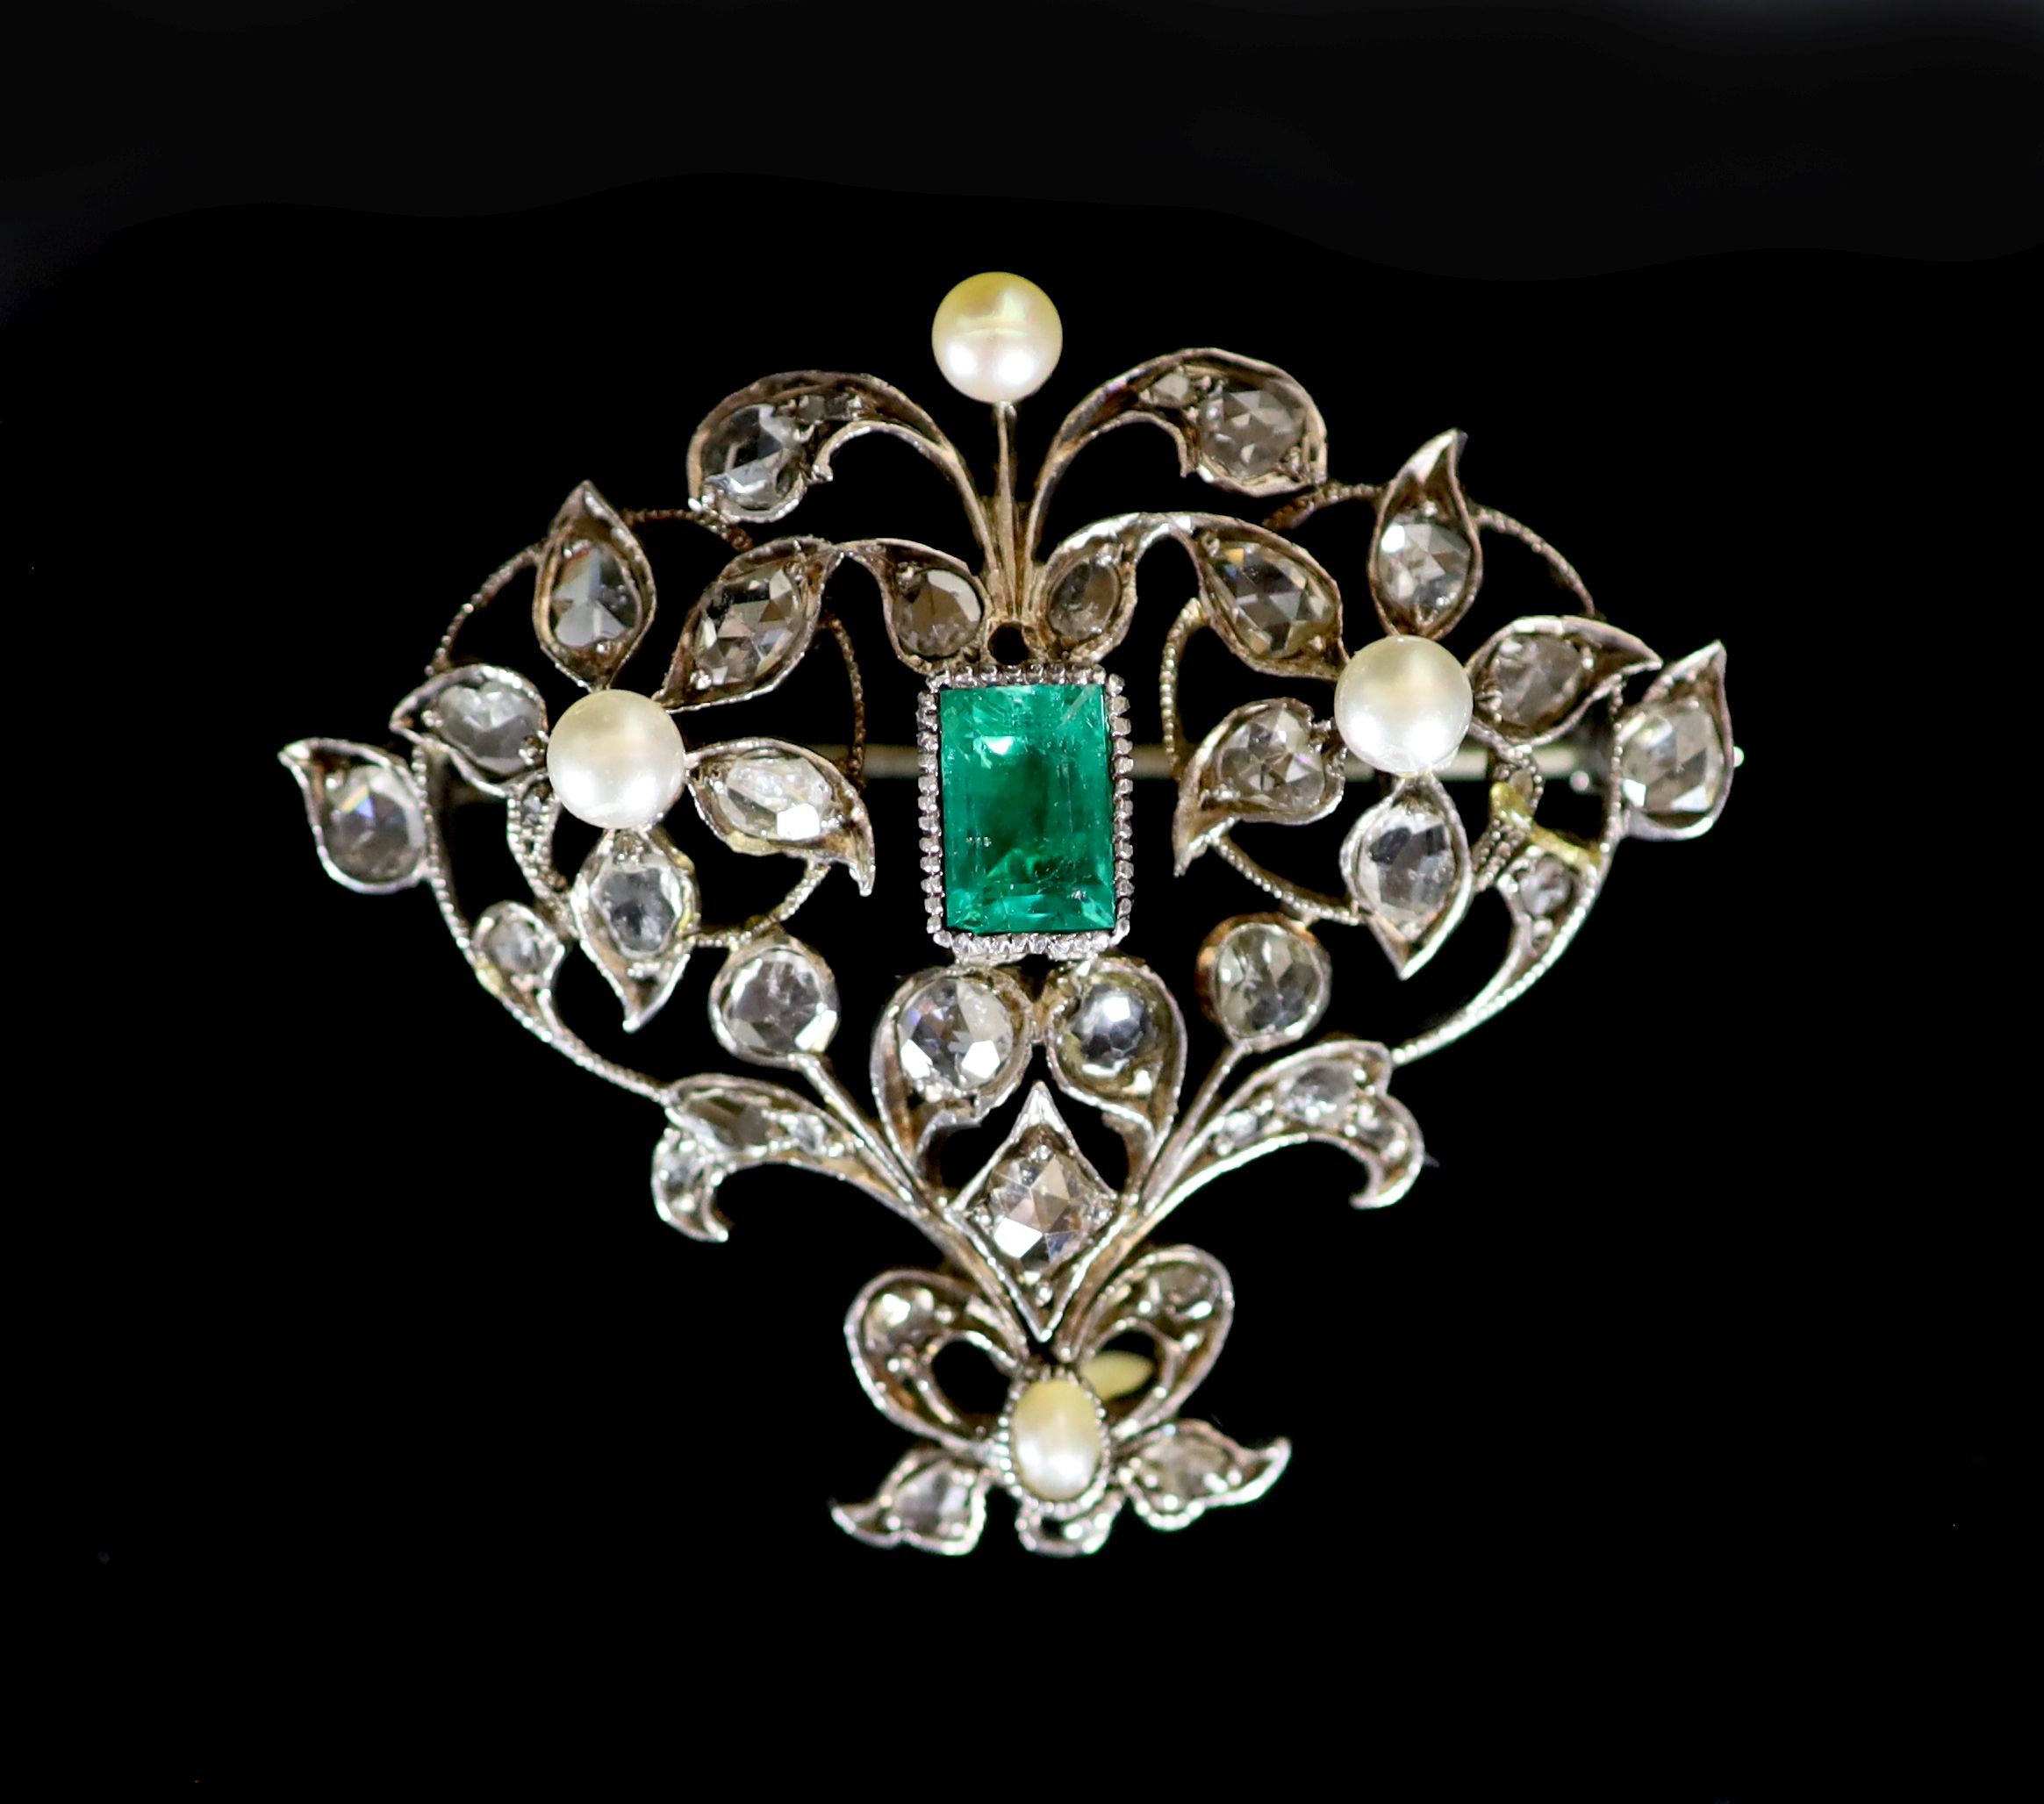 A 19th century silver and gold? emerald, pearl and rose cut diamond set drop brooch